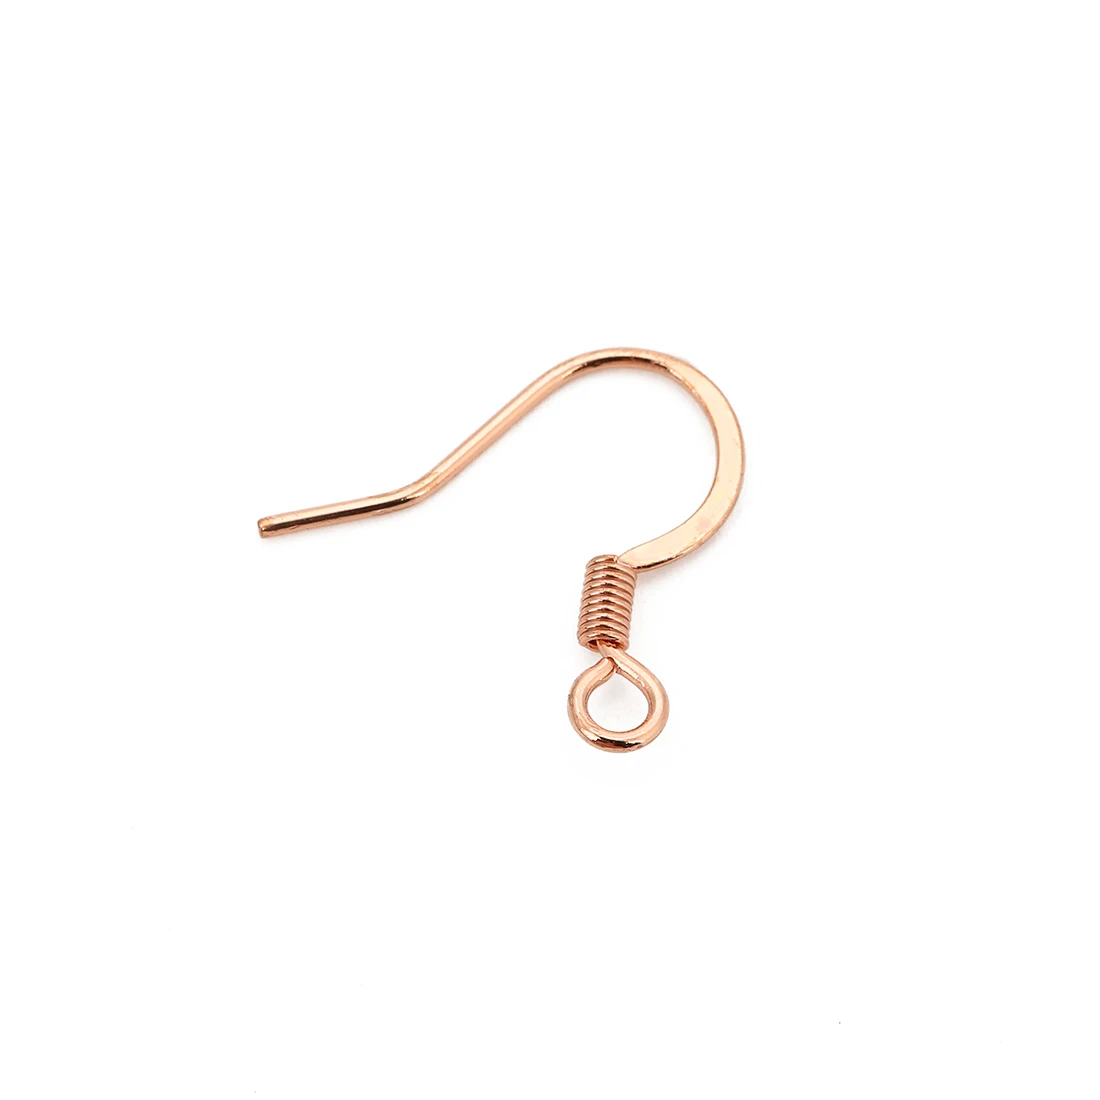 50pcs/lot 316L Surgical Stainless Steel 0.7x15mm Gold Rose Gold Silver Tone  Ear Wire Fish Hook DIY Earring Clasp Jewelry Finding